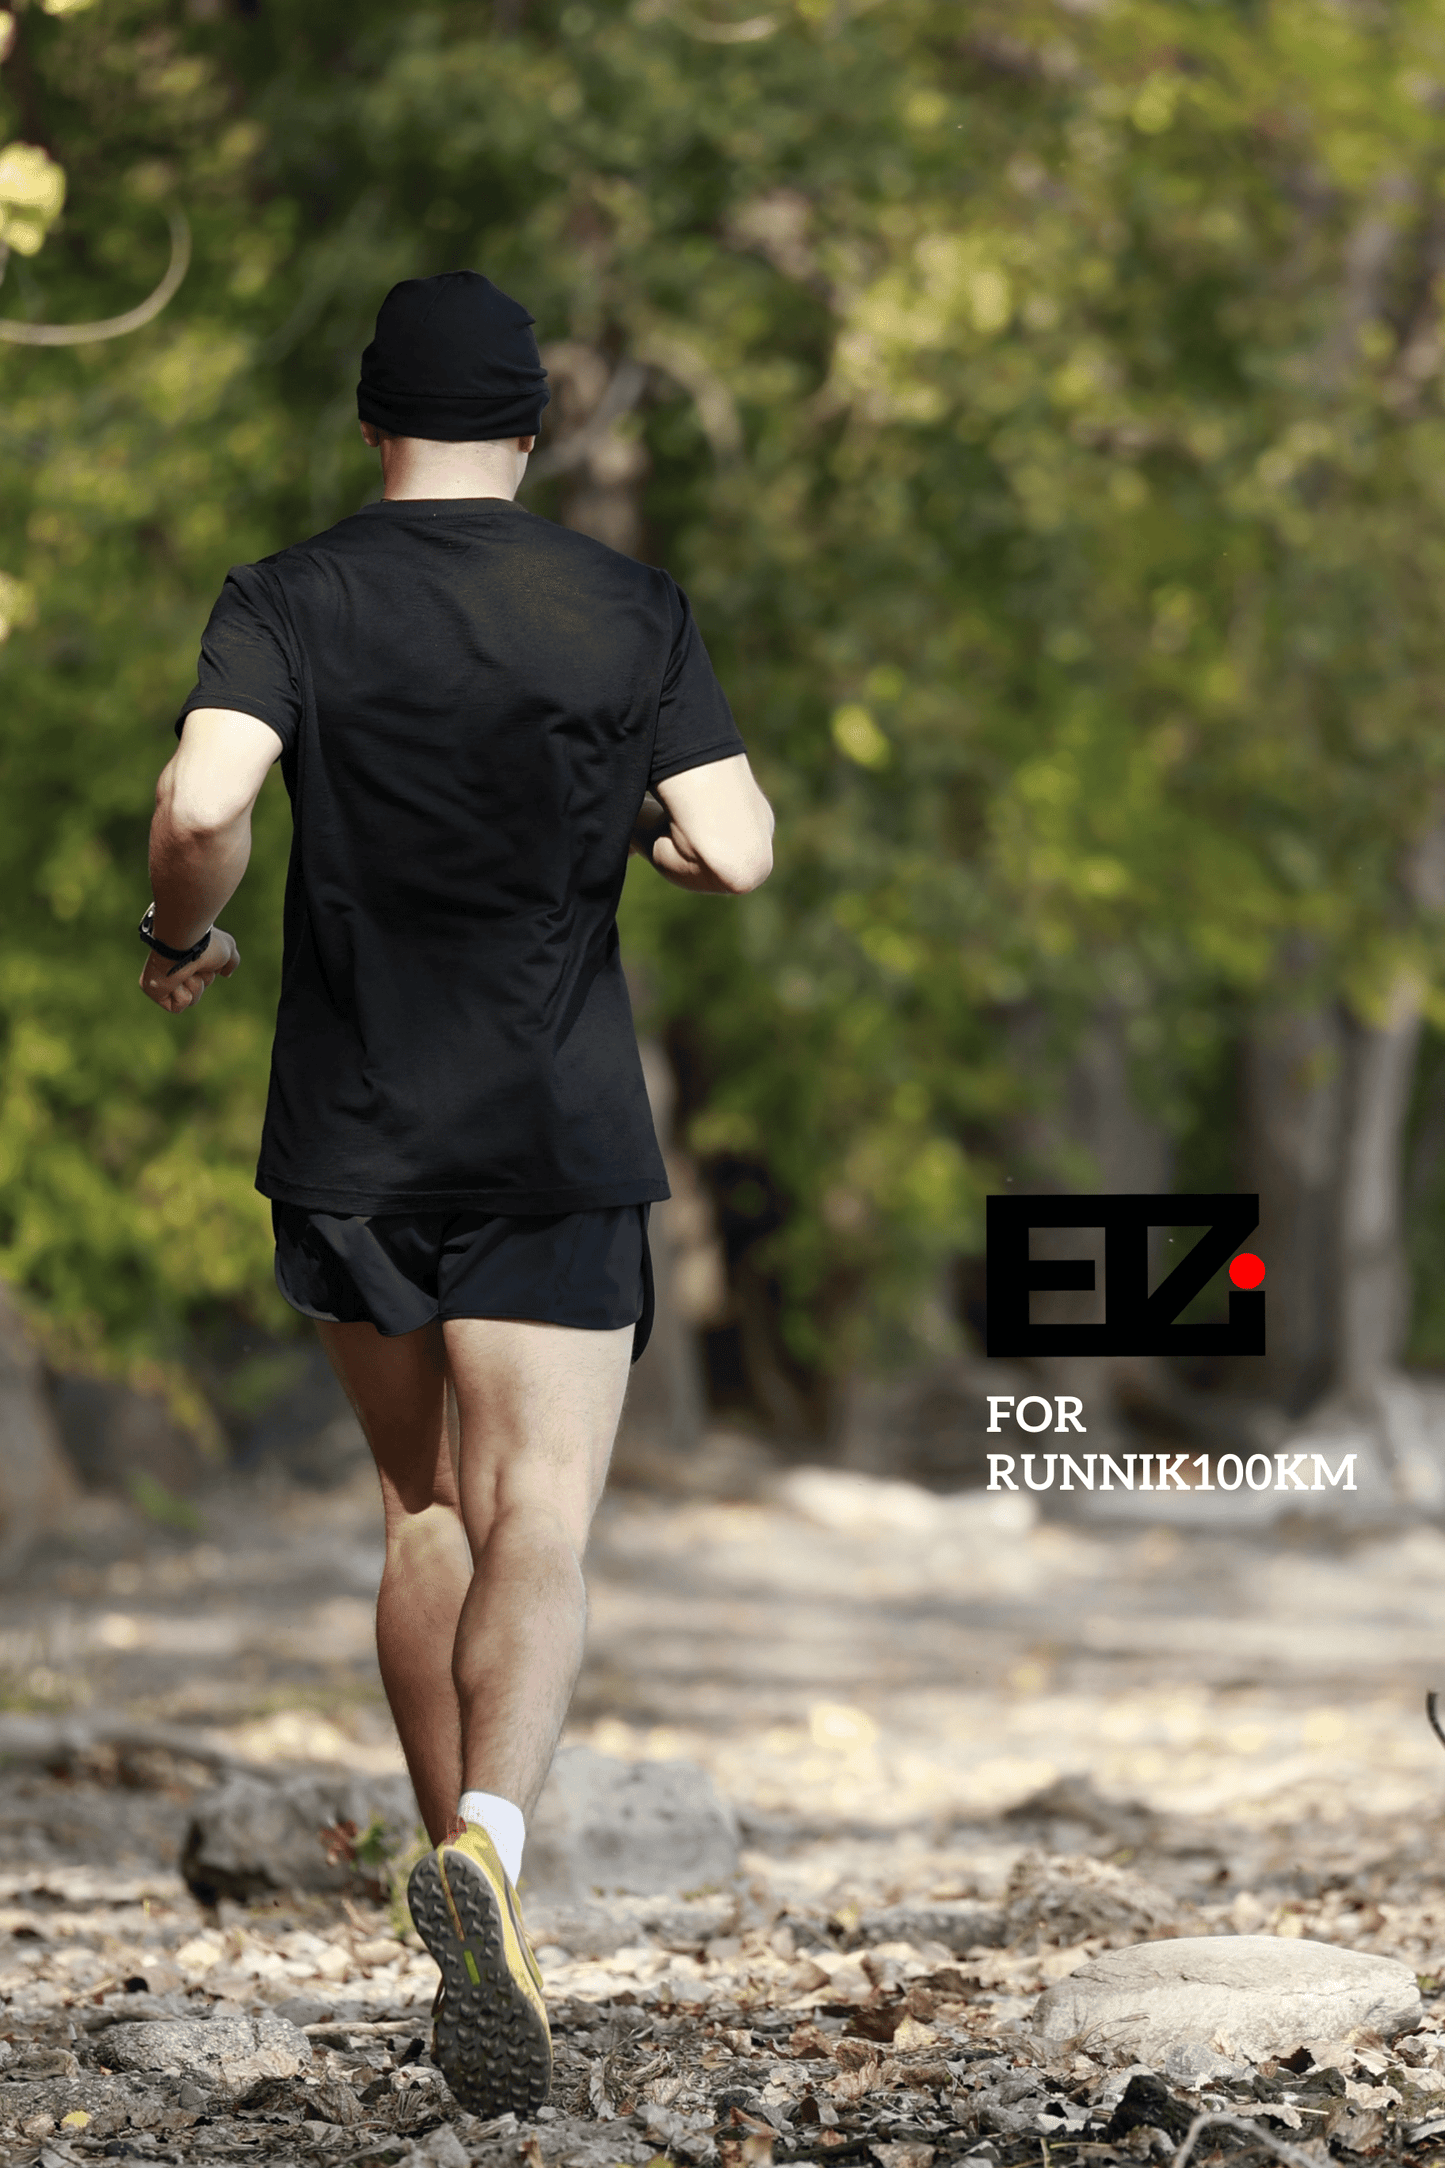 ELZI for runnik100km t-shirt. Black Merino Wool T-shirt for ultra runners. Zero chafing, no itchiness. Running away on a Montreal Trail Run. Picture by Jonathan Brunelle.